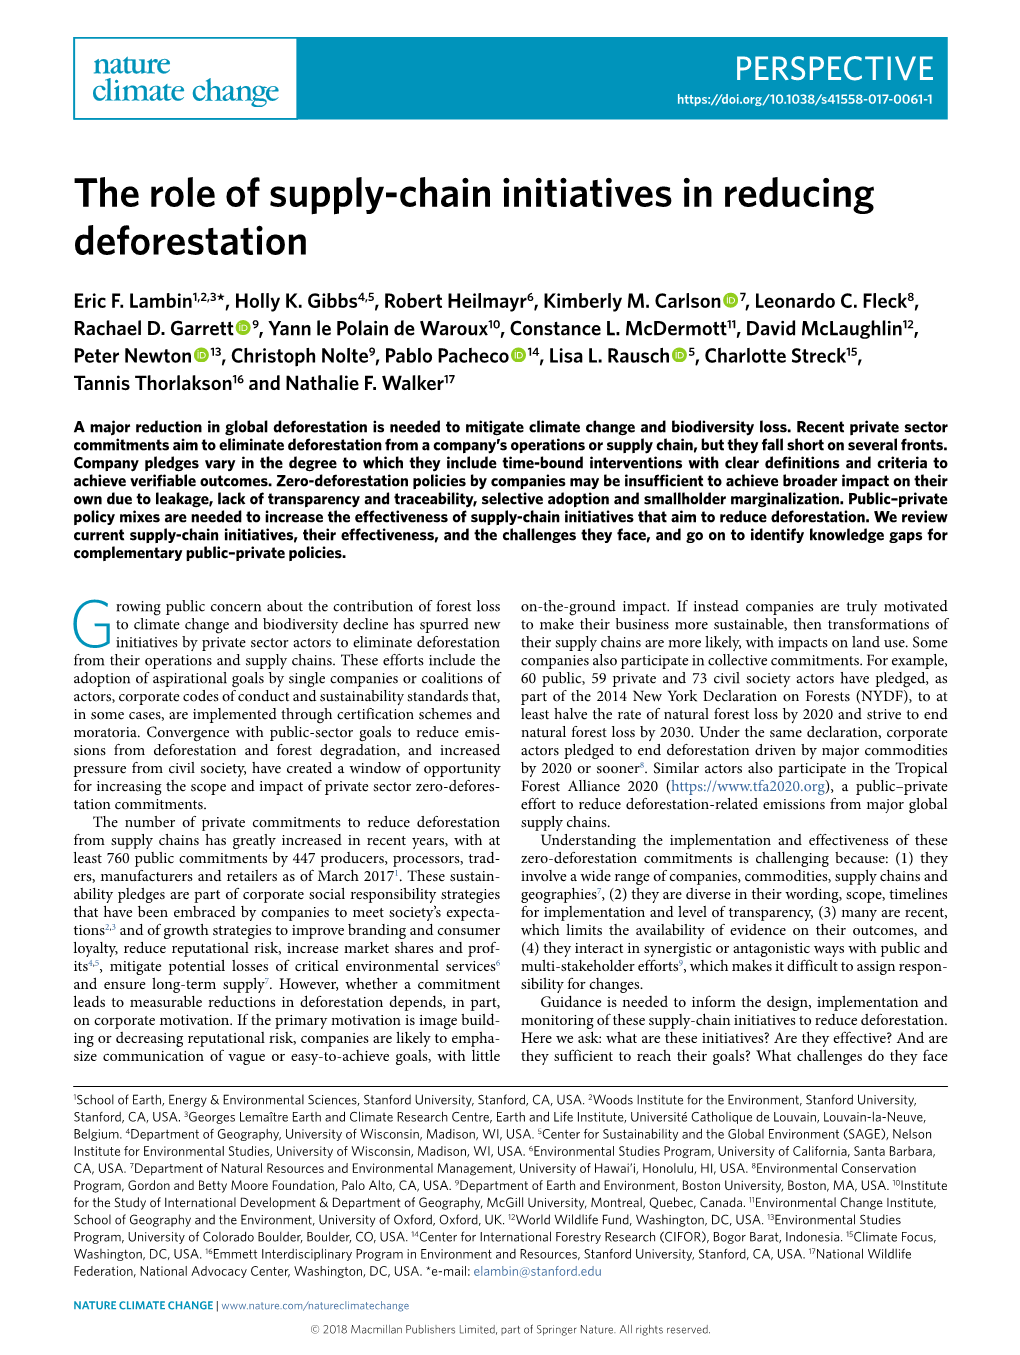 The Role of Supply-Chain Initiatives in Reducing Deforestation